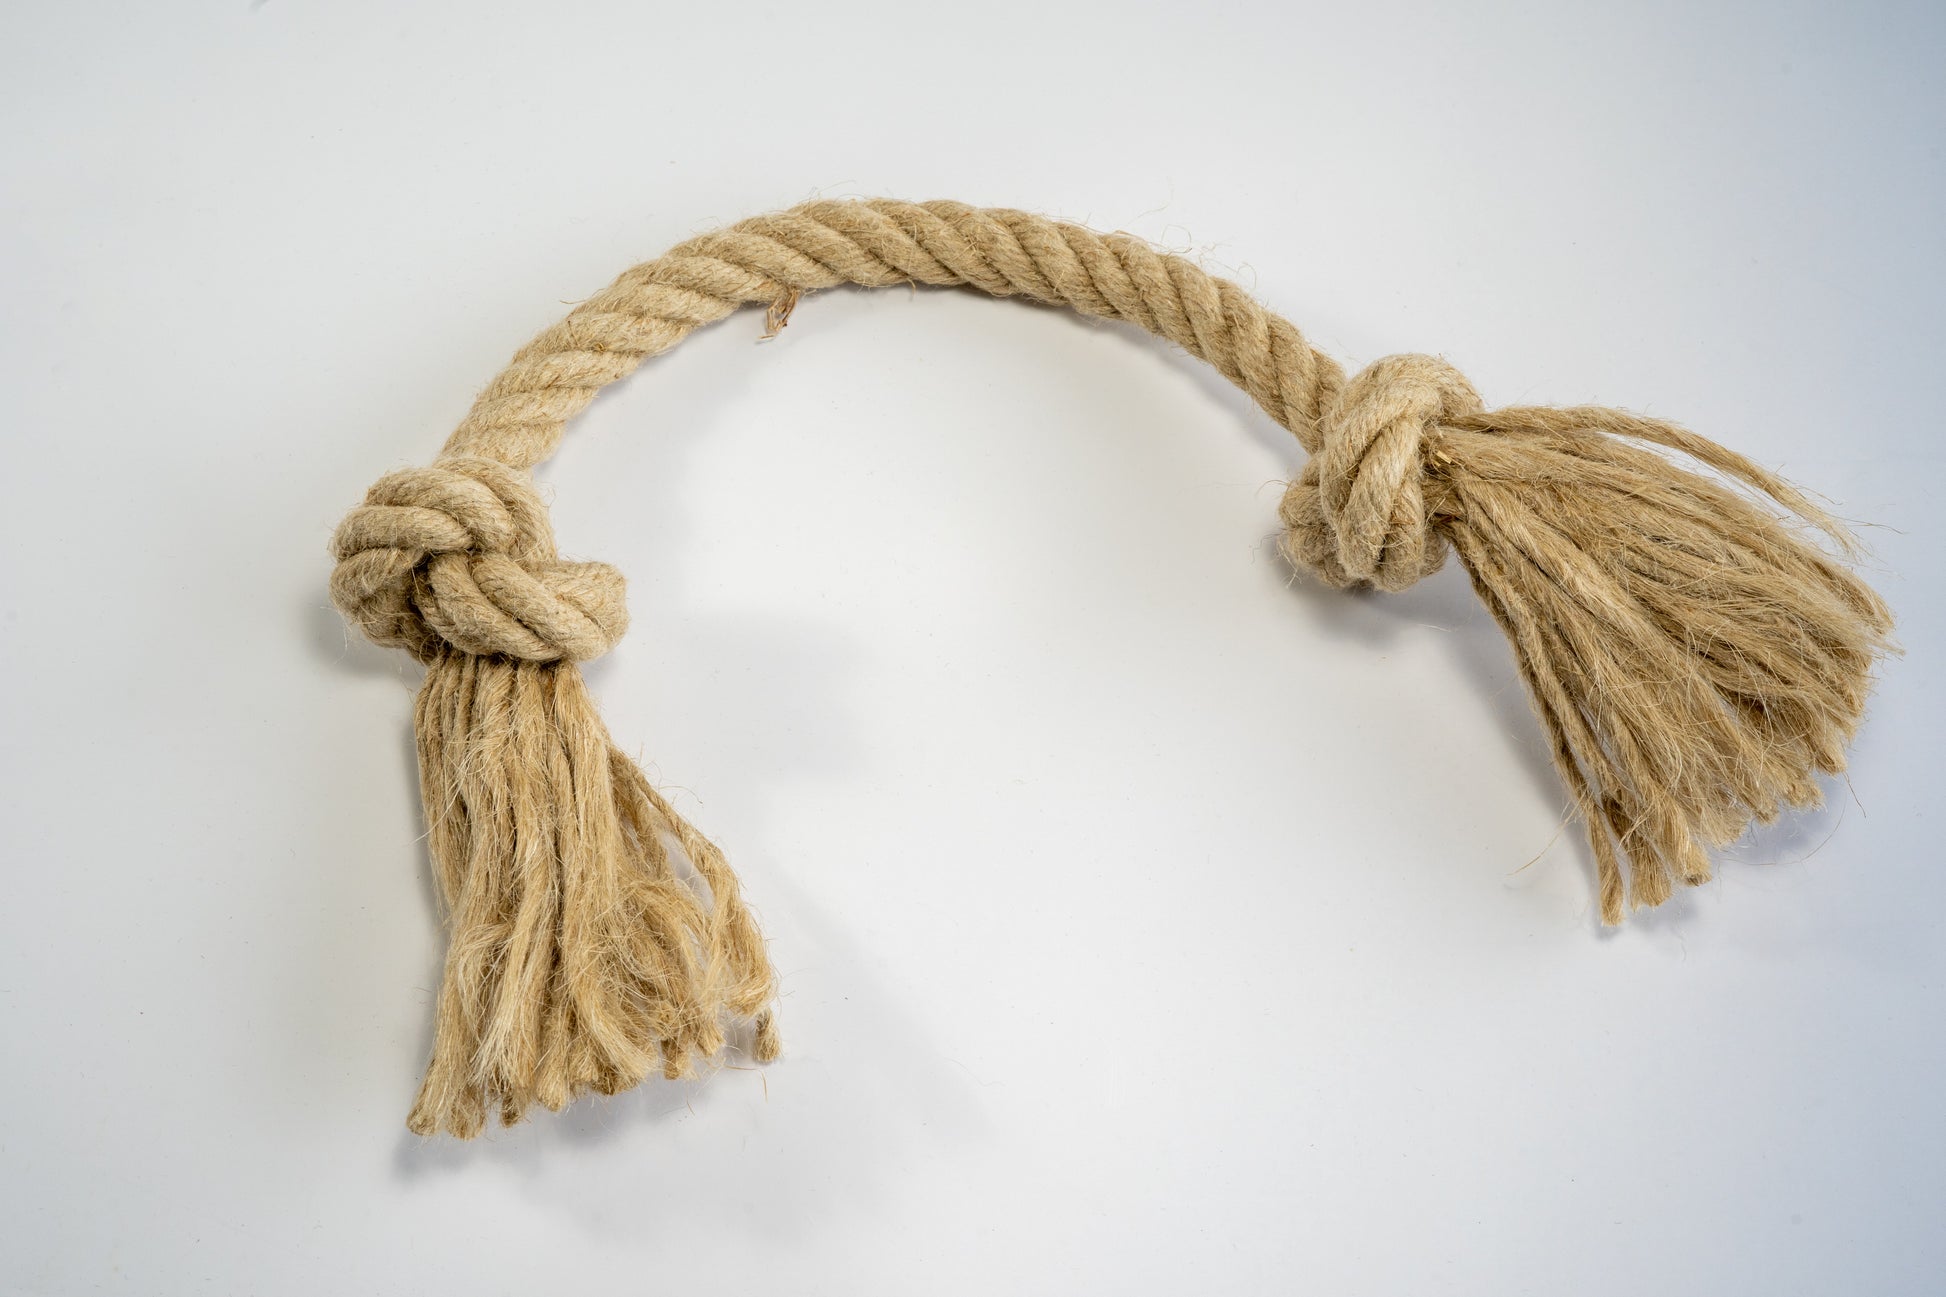 Medium toy for dogs made from hemp rope with knots at the ends. | Jouet de taille moyenne pour chiens en corde de chanvre avec noeuds aux bouts.